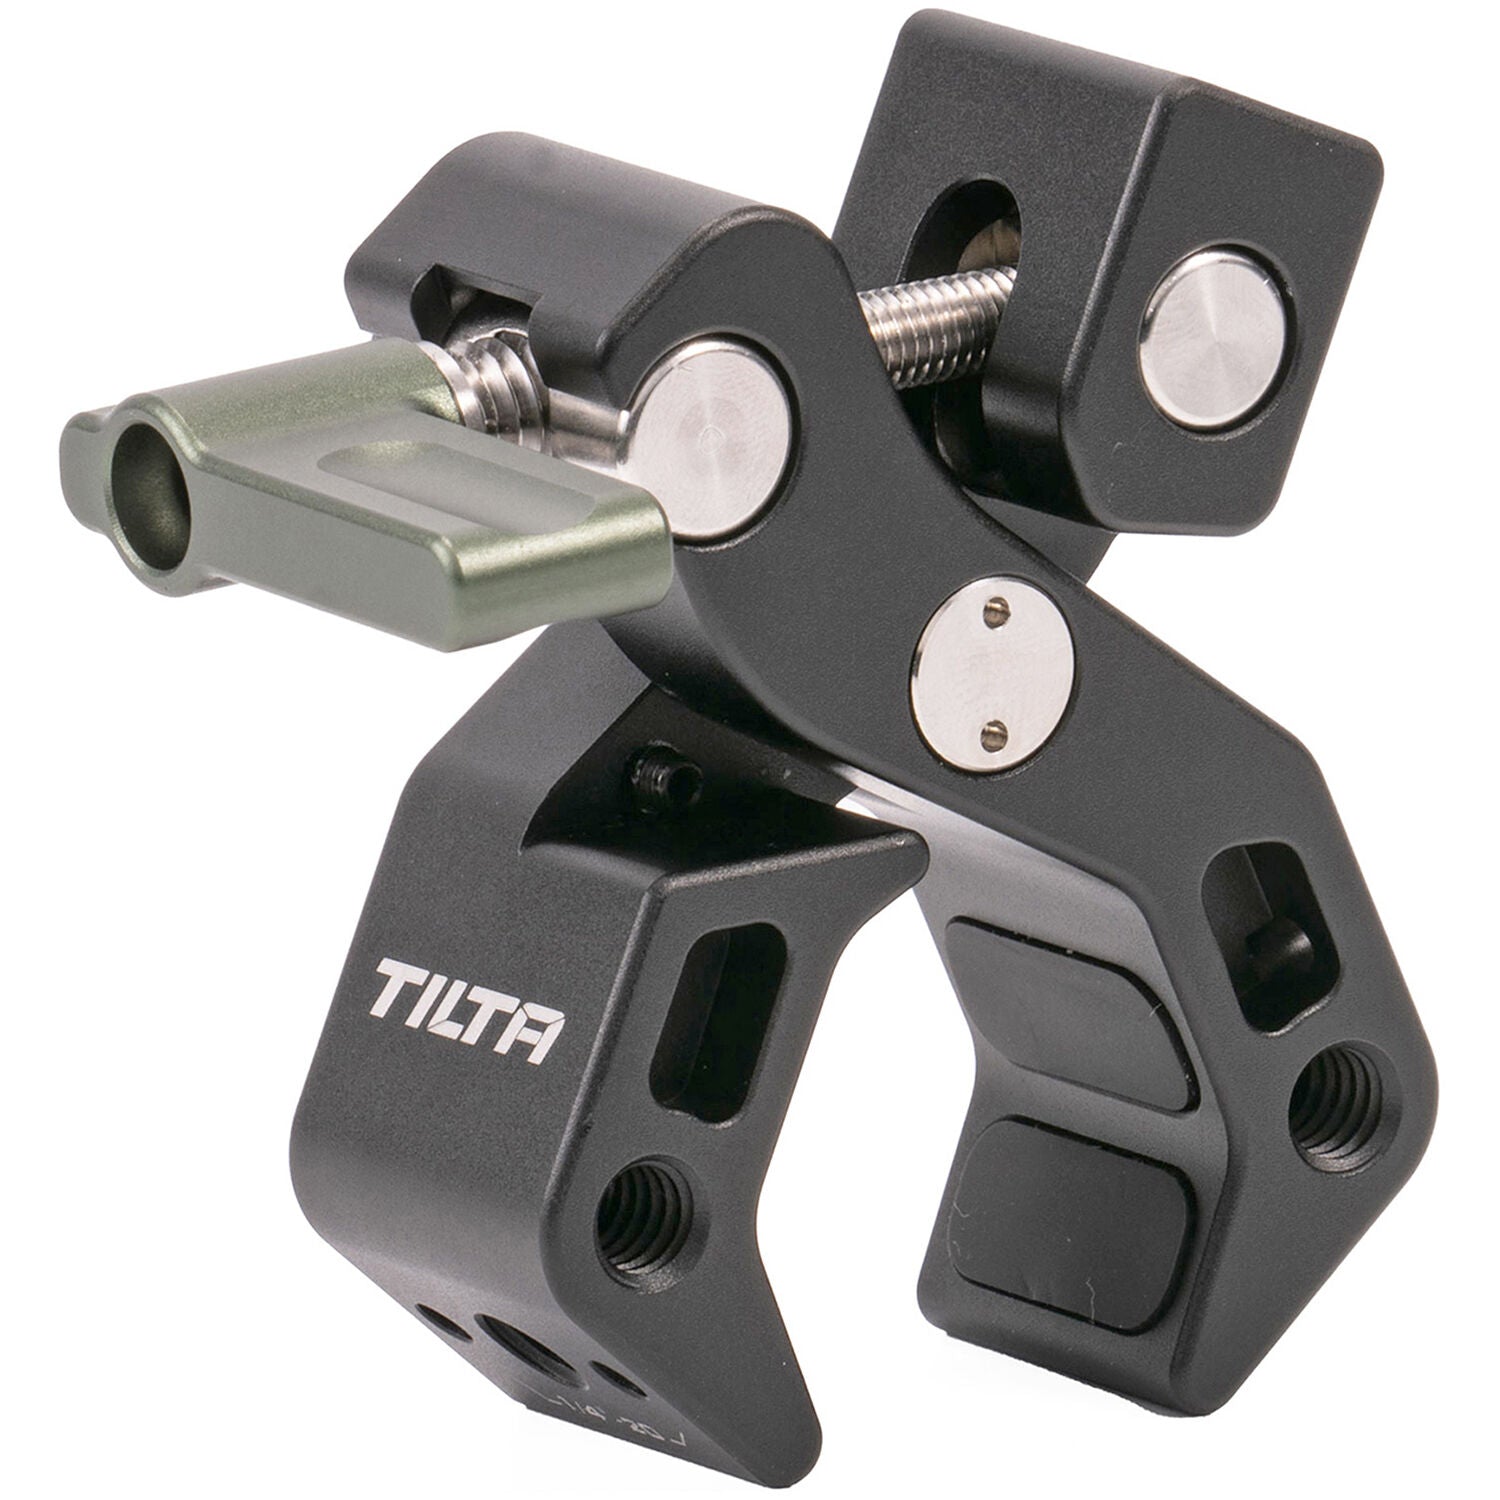 Tilta Accessory Mounting Clamp (Black)